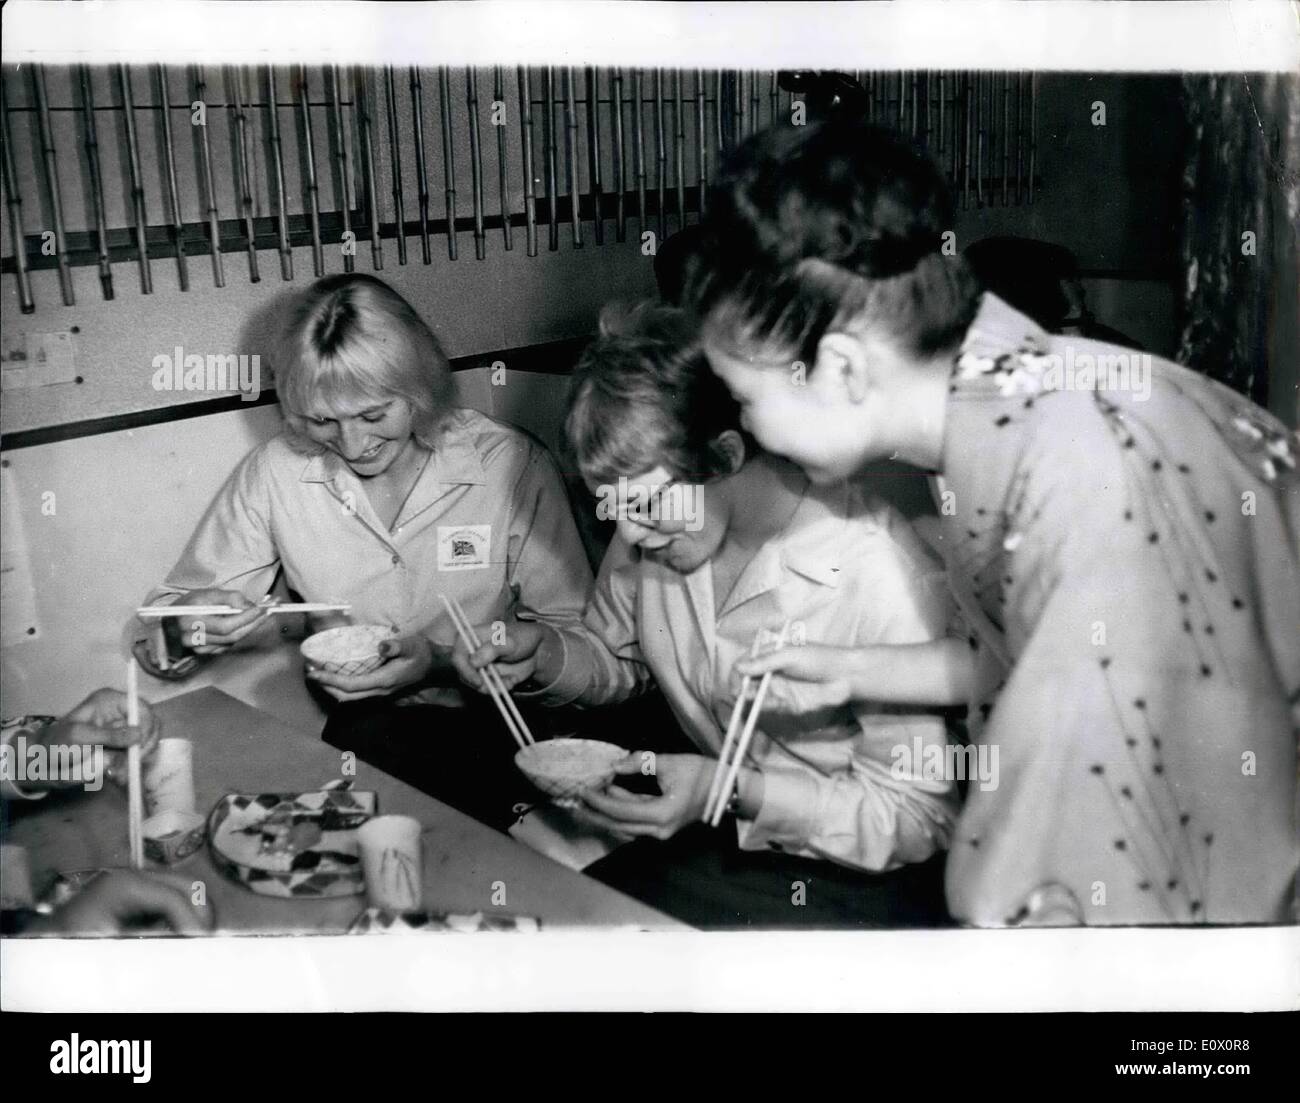 Oct. 10, 1964 - Britain's Girl Olympic Swimmers Try Eating Japanese Style; P[hot Shows Britain's Olympic Girl swimmers Sylvia Lewis (left), 110-meters backstroke, and Jill Slattery 200-metres breaststroke, get into difficulties as they try out chopsticks in a Japanese restaurant in the Tackio. Stock Photo